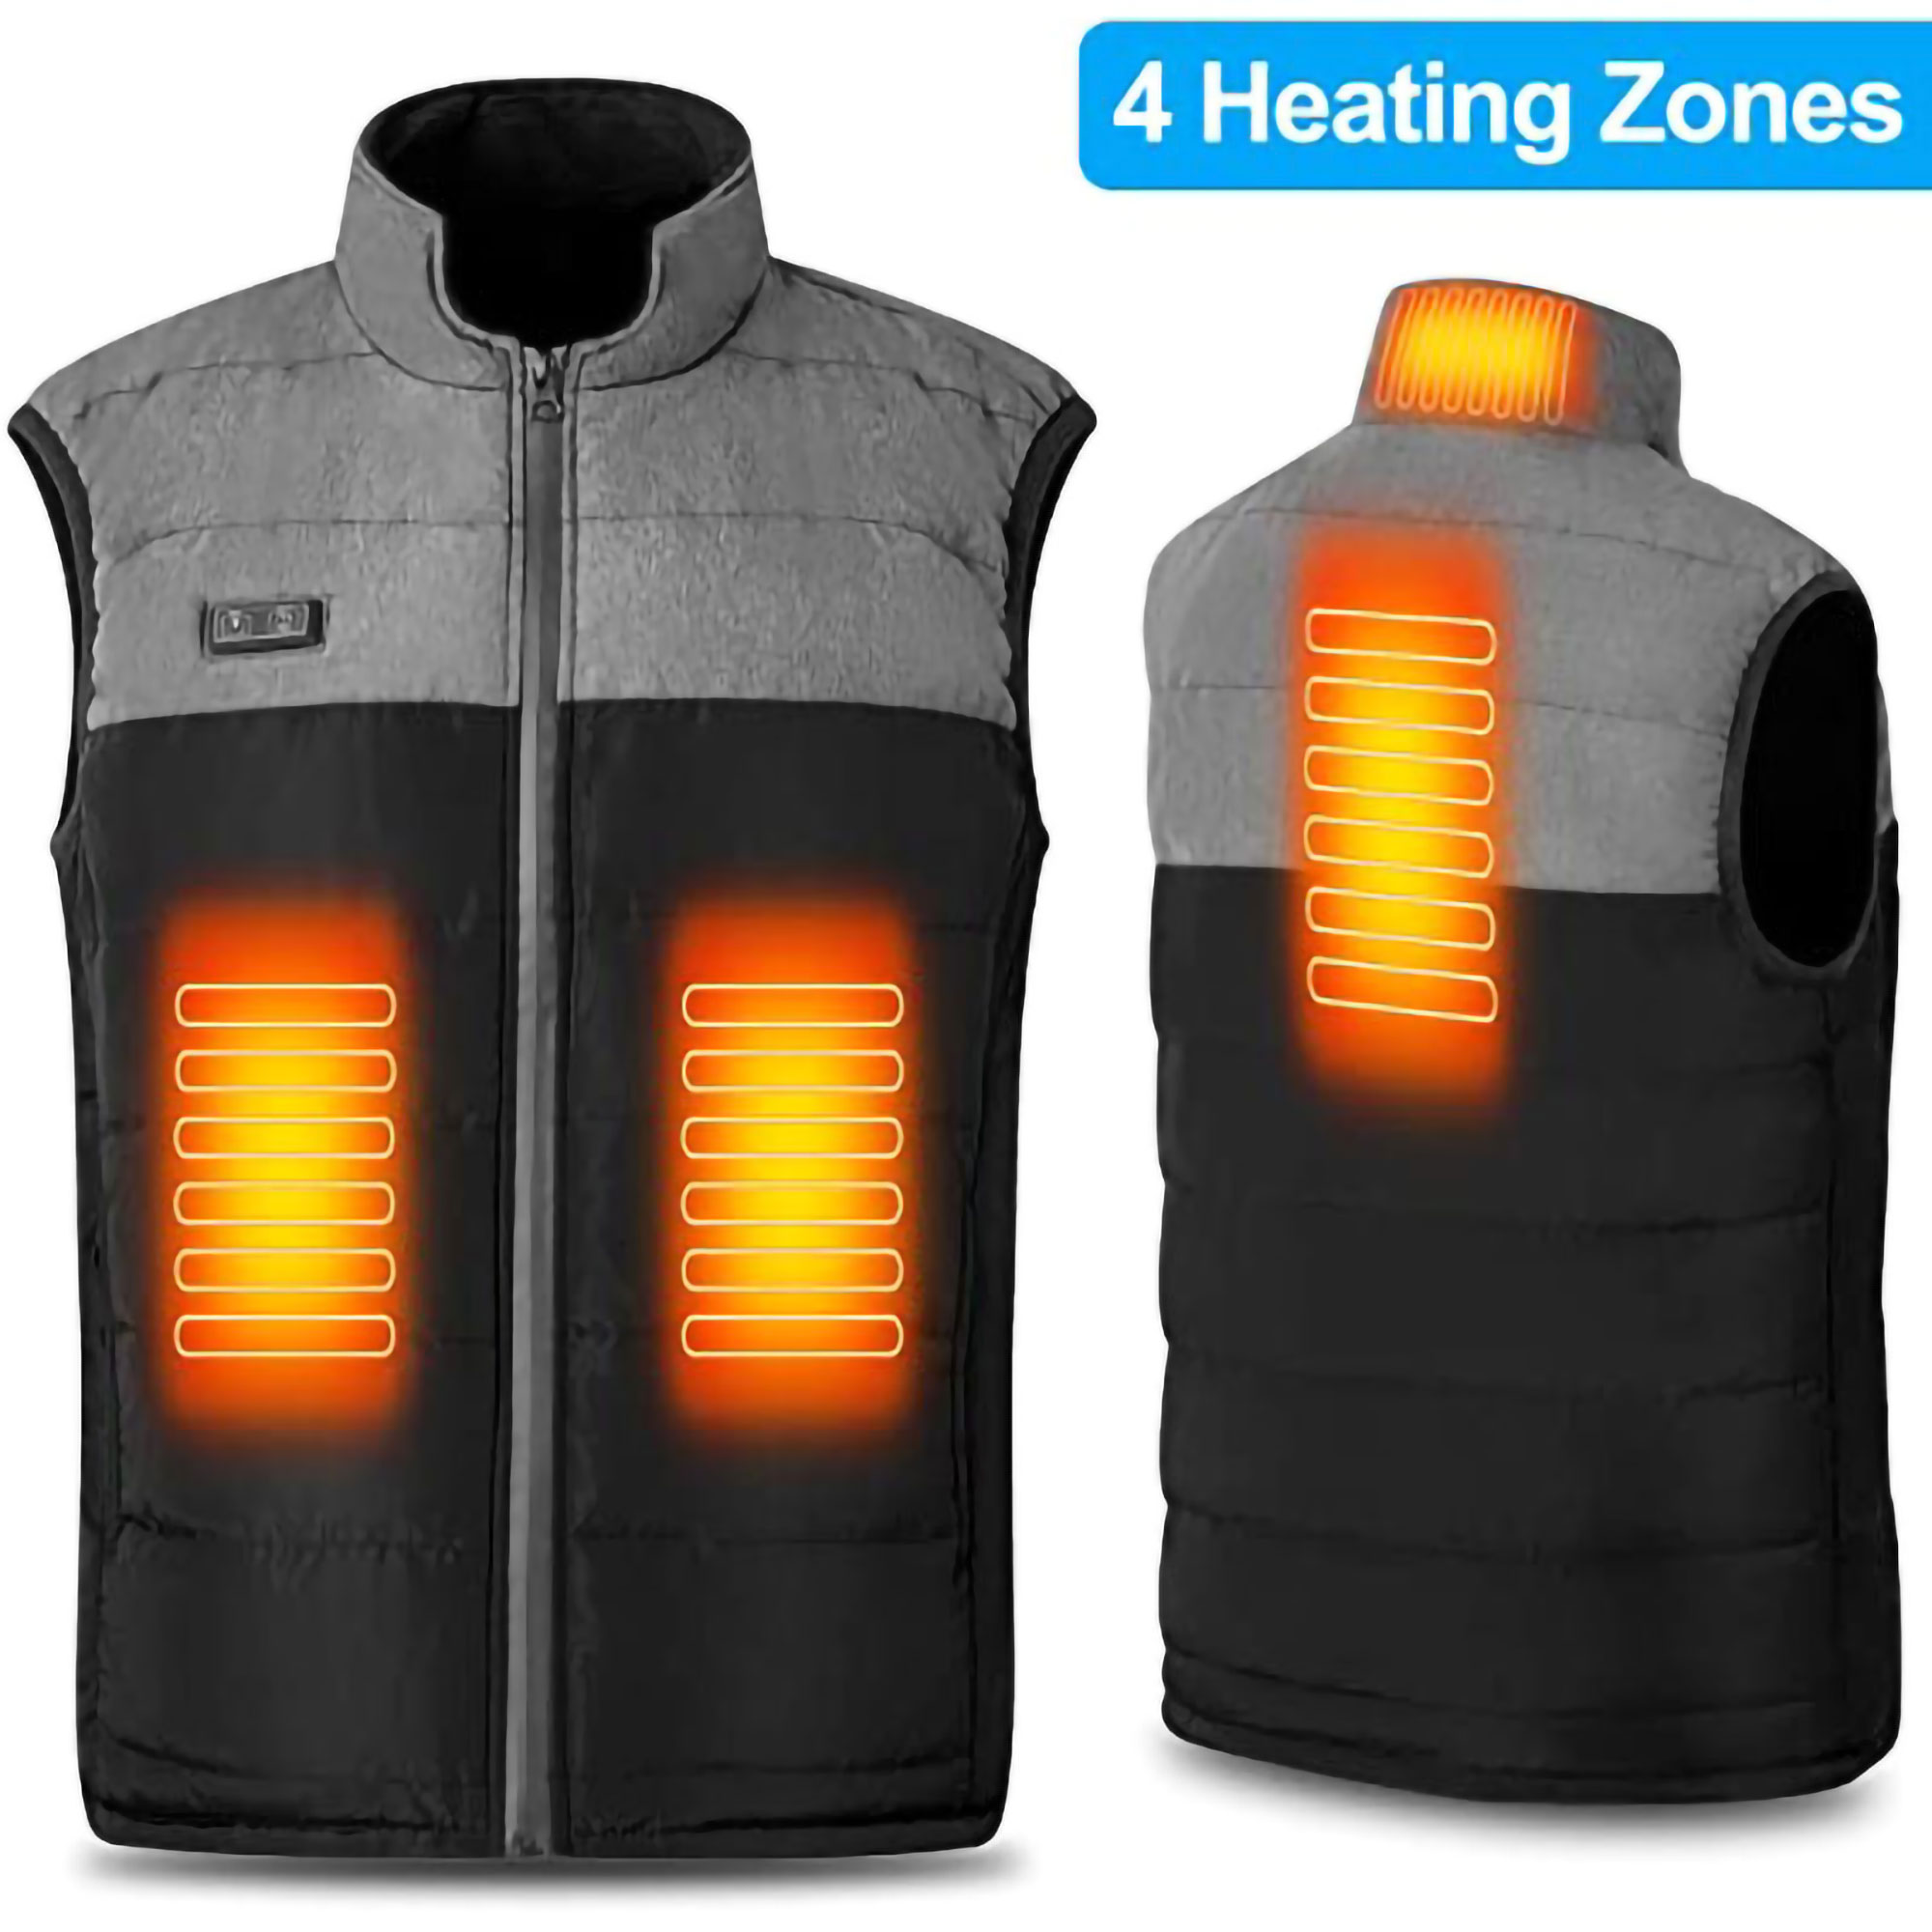 Sexy Dance Electric Thermal Heated Vest for Men Women Sleeveless Zipper Heating Jacket Lightweight Warmth Outwear With Battery Pack - image 3 of 11